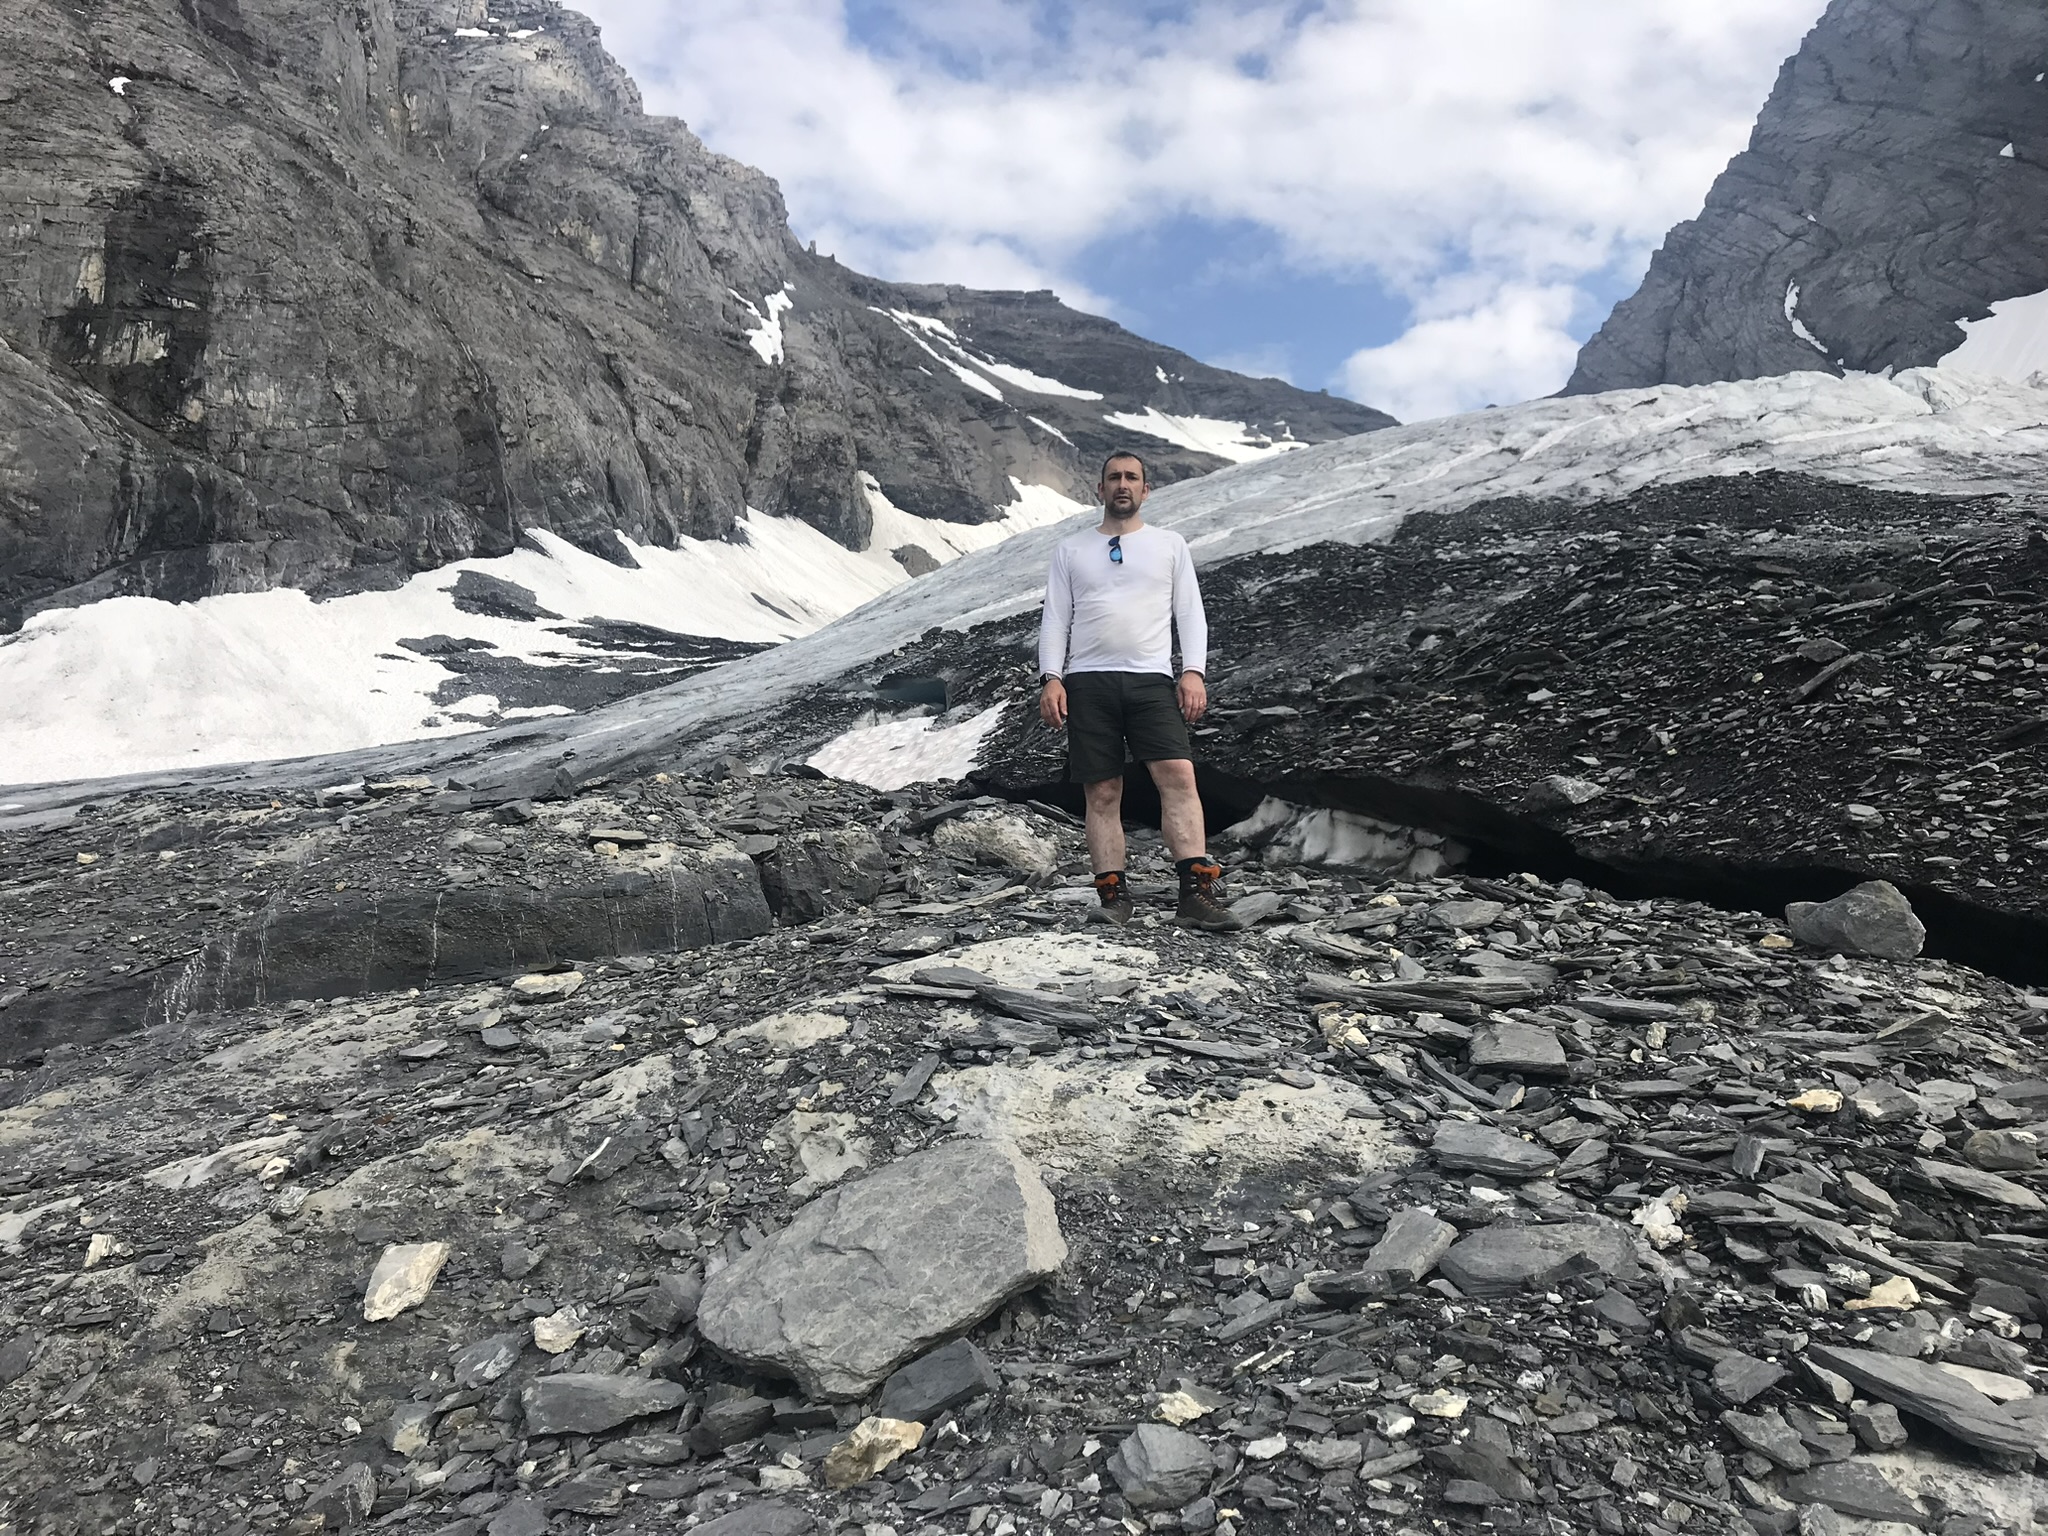 Steve Holiday, Tyne and Wear SLC member, standing on a mountain, surrounded by rocks with some ice and snow shown in around him. He is wearing shorts!